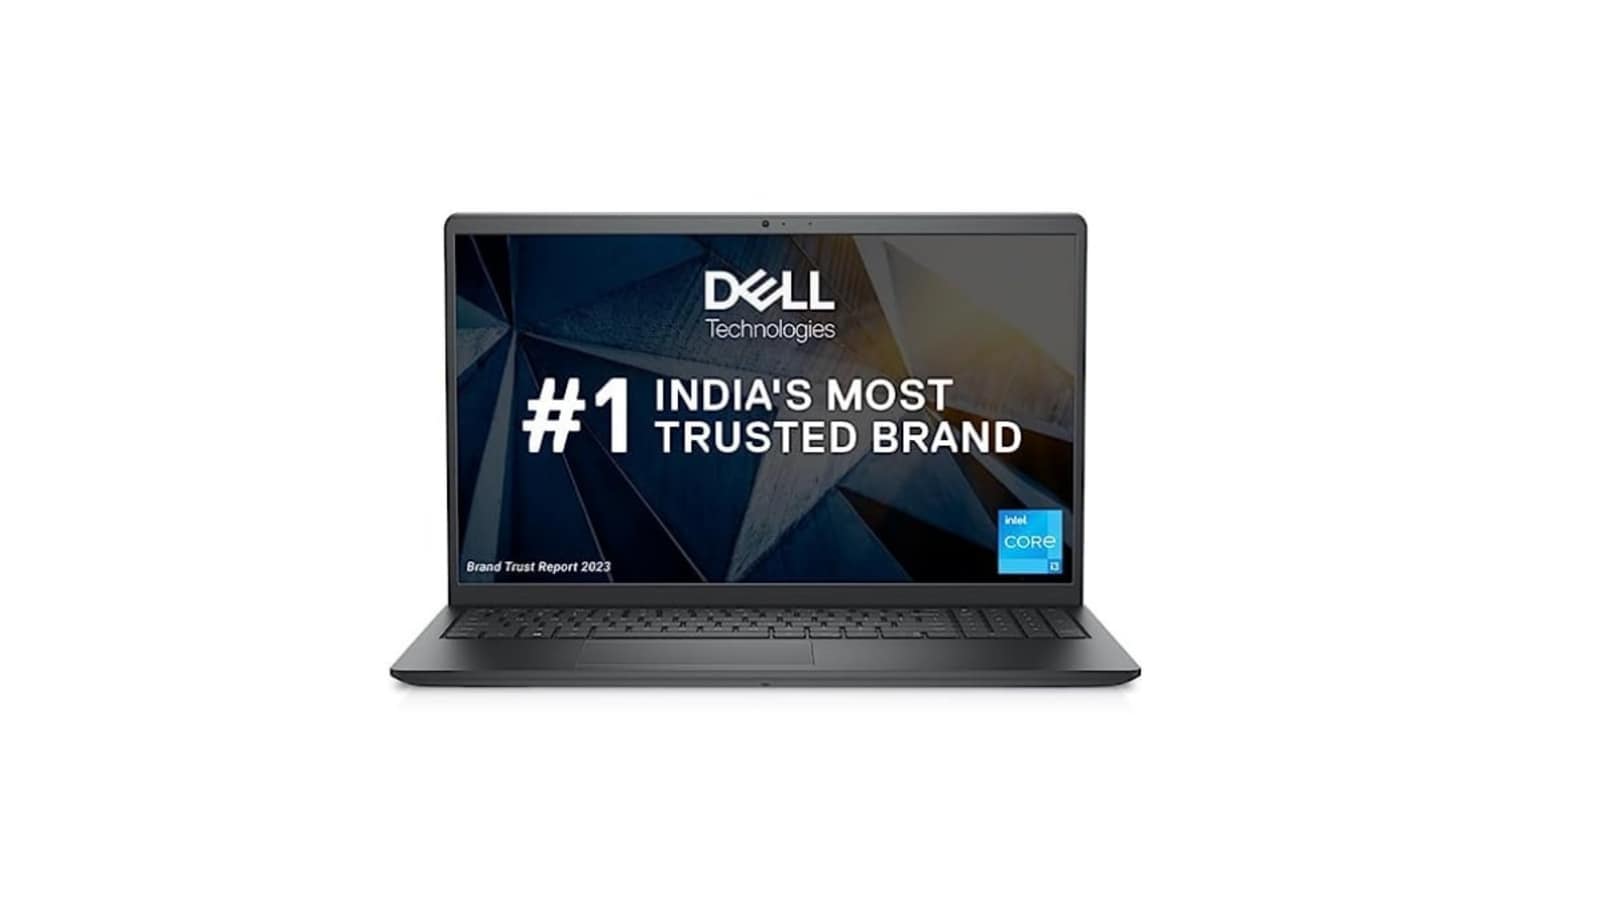 10 top Dell Laptops: With Christmas coming, here is a great gadget gifting guide for you